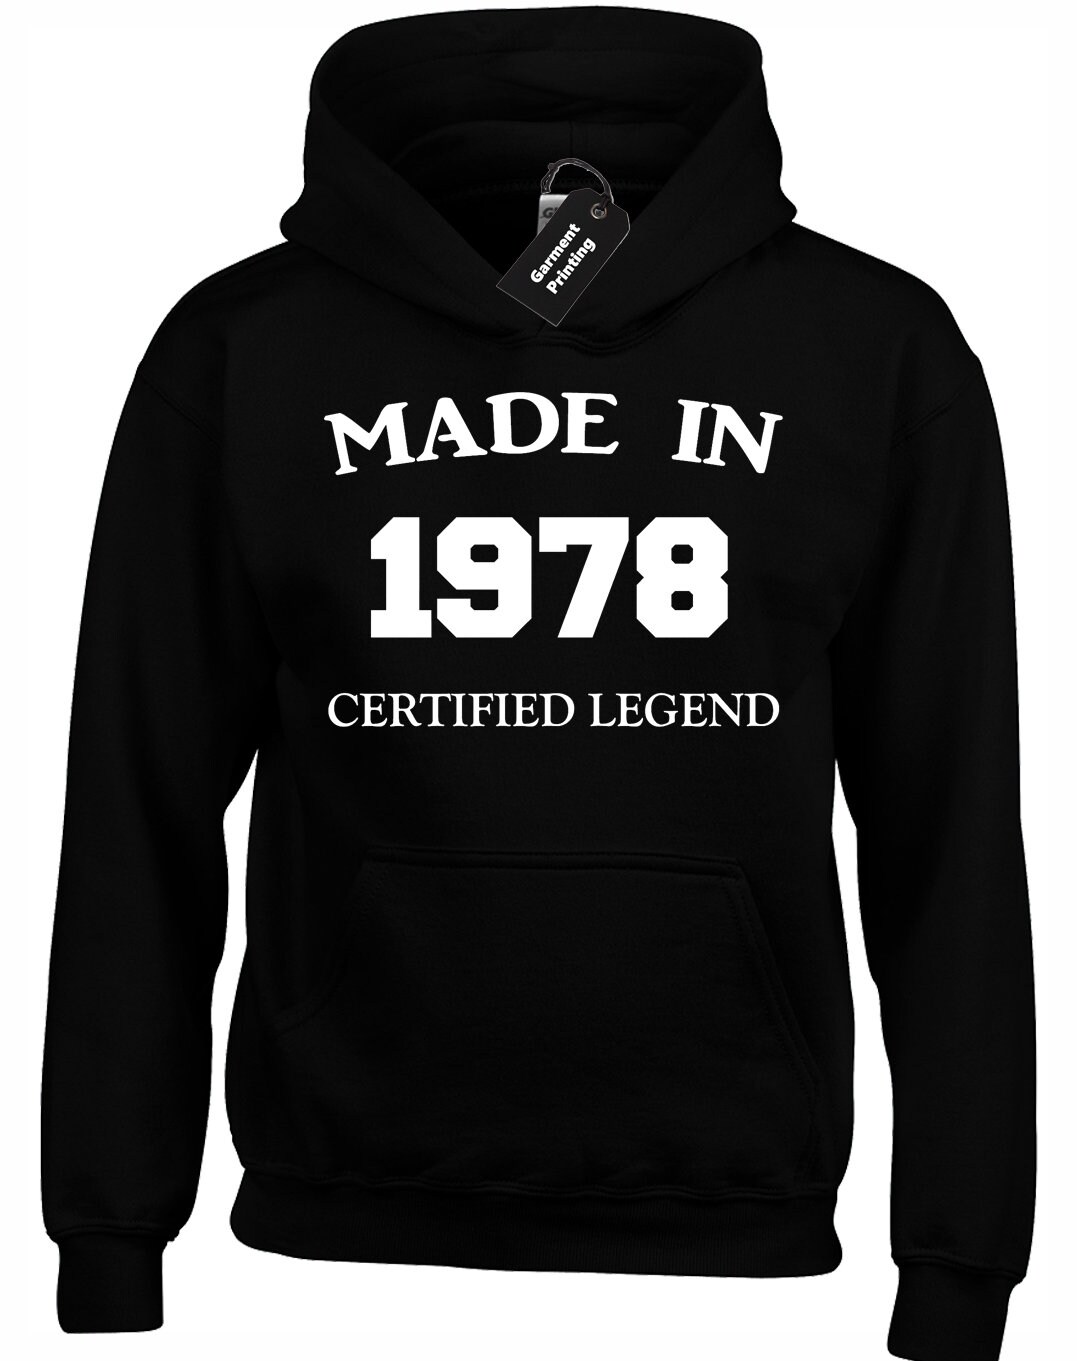 Made In 1978 Hoody Hoodie Unisex Funny 40TH Birthday Gift | Etsy